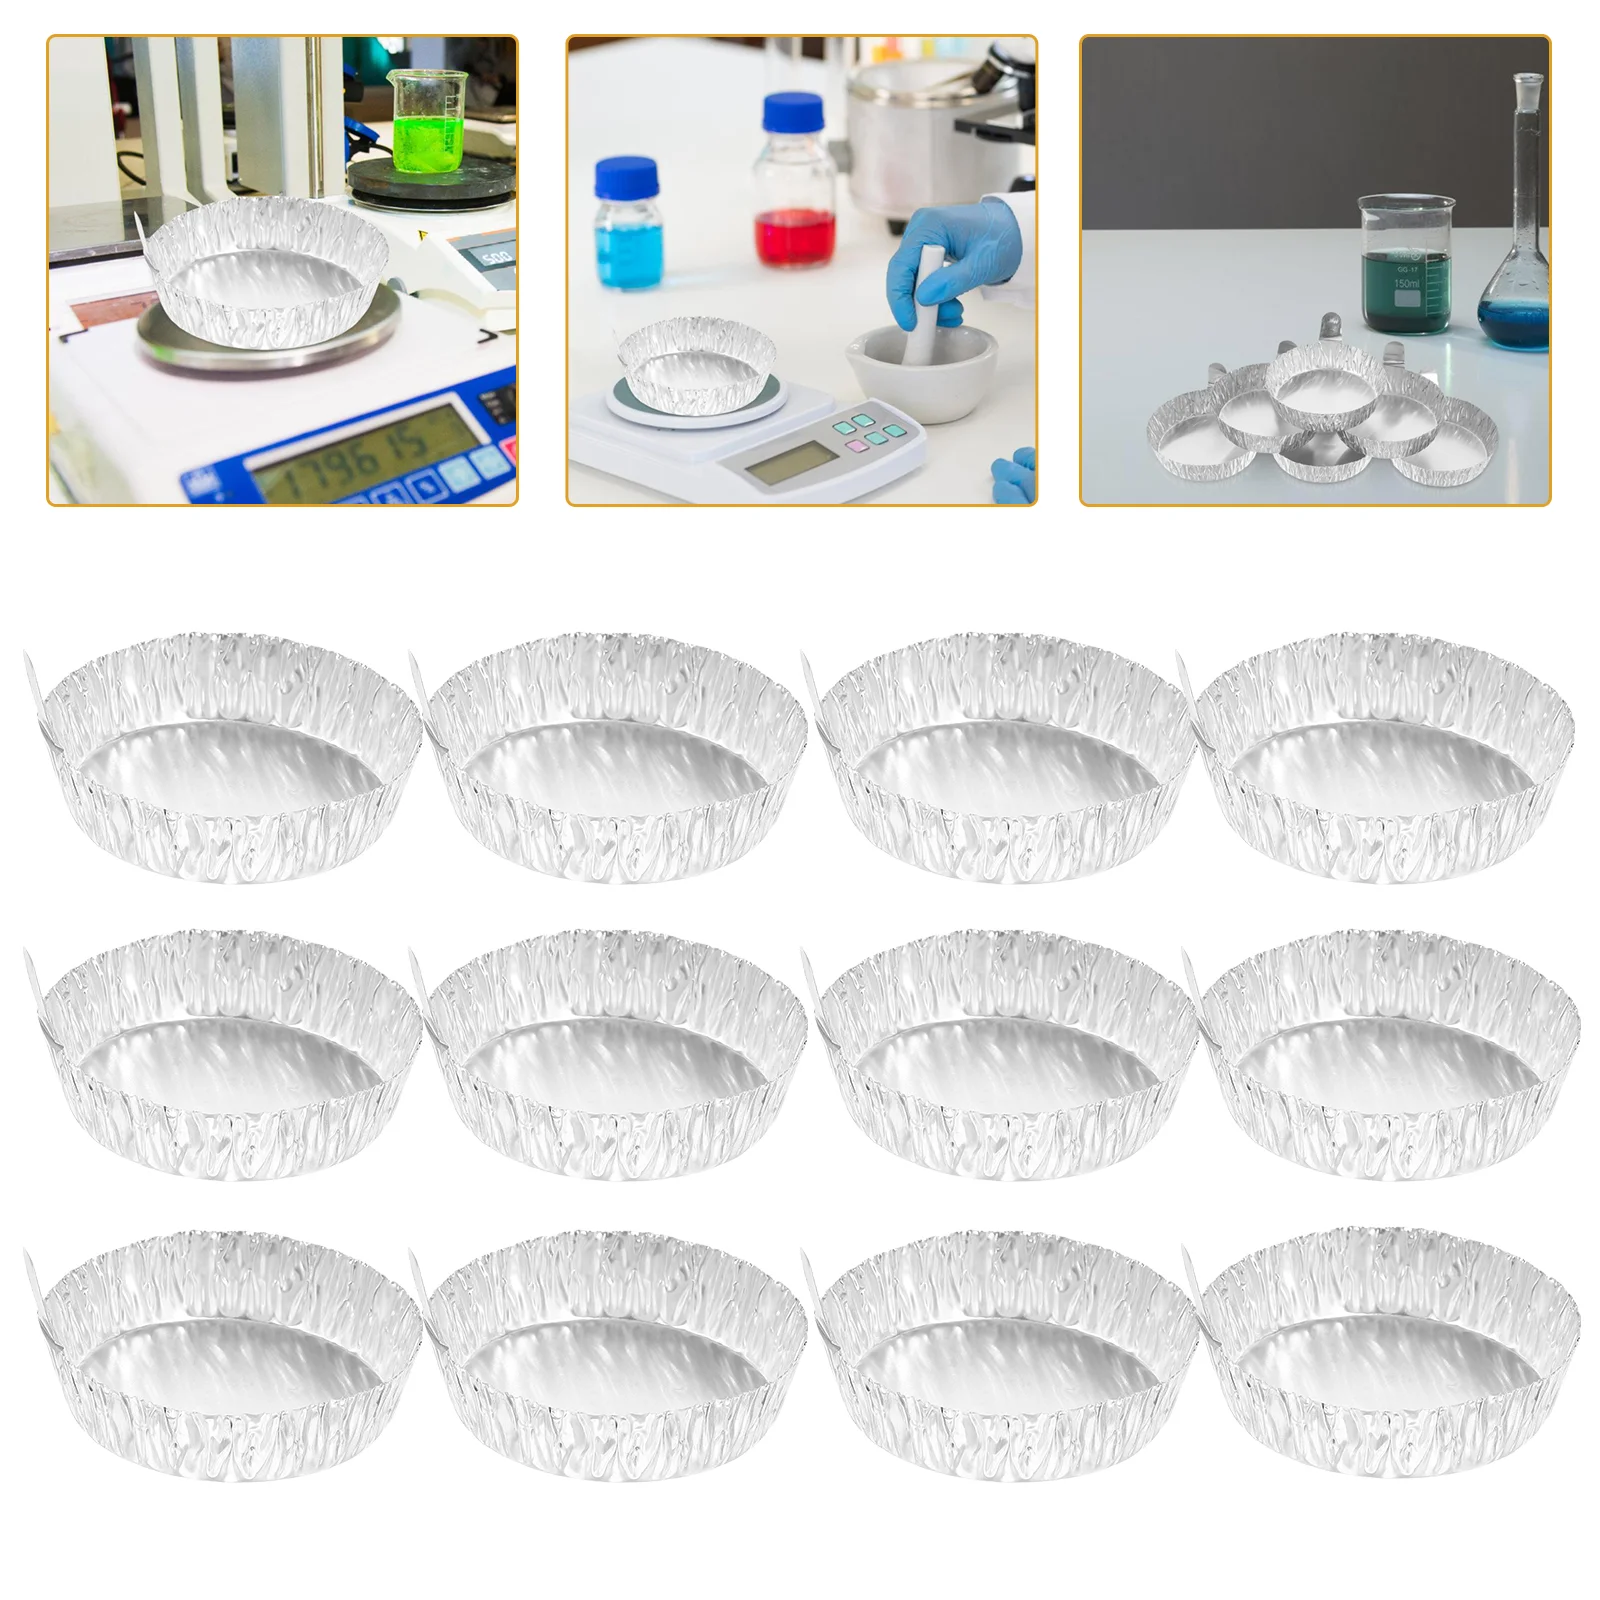 

100pcs Weigh Boats with Handle Sample Weighing Trays Portable Weighing Dishes Lab Equipment Pans(42ml)